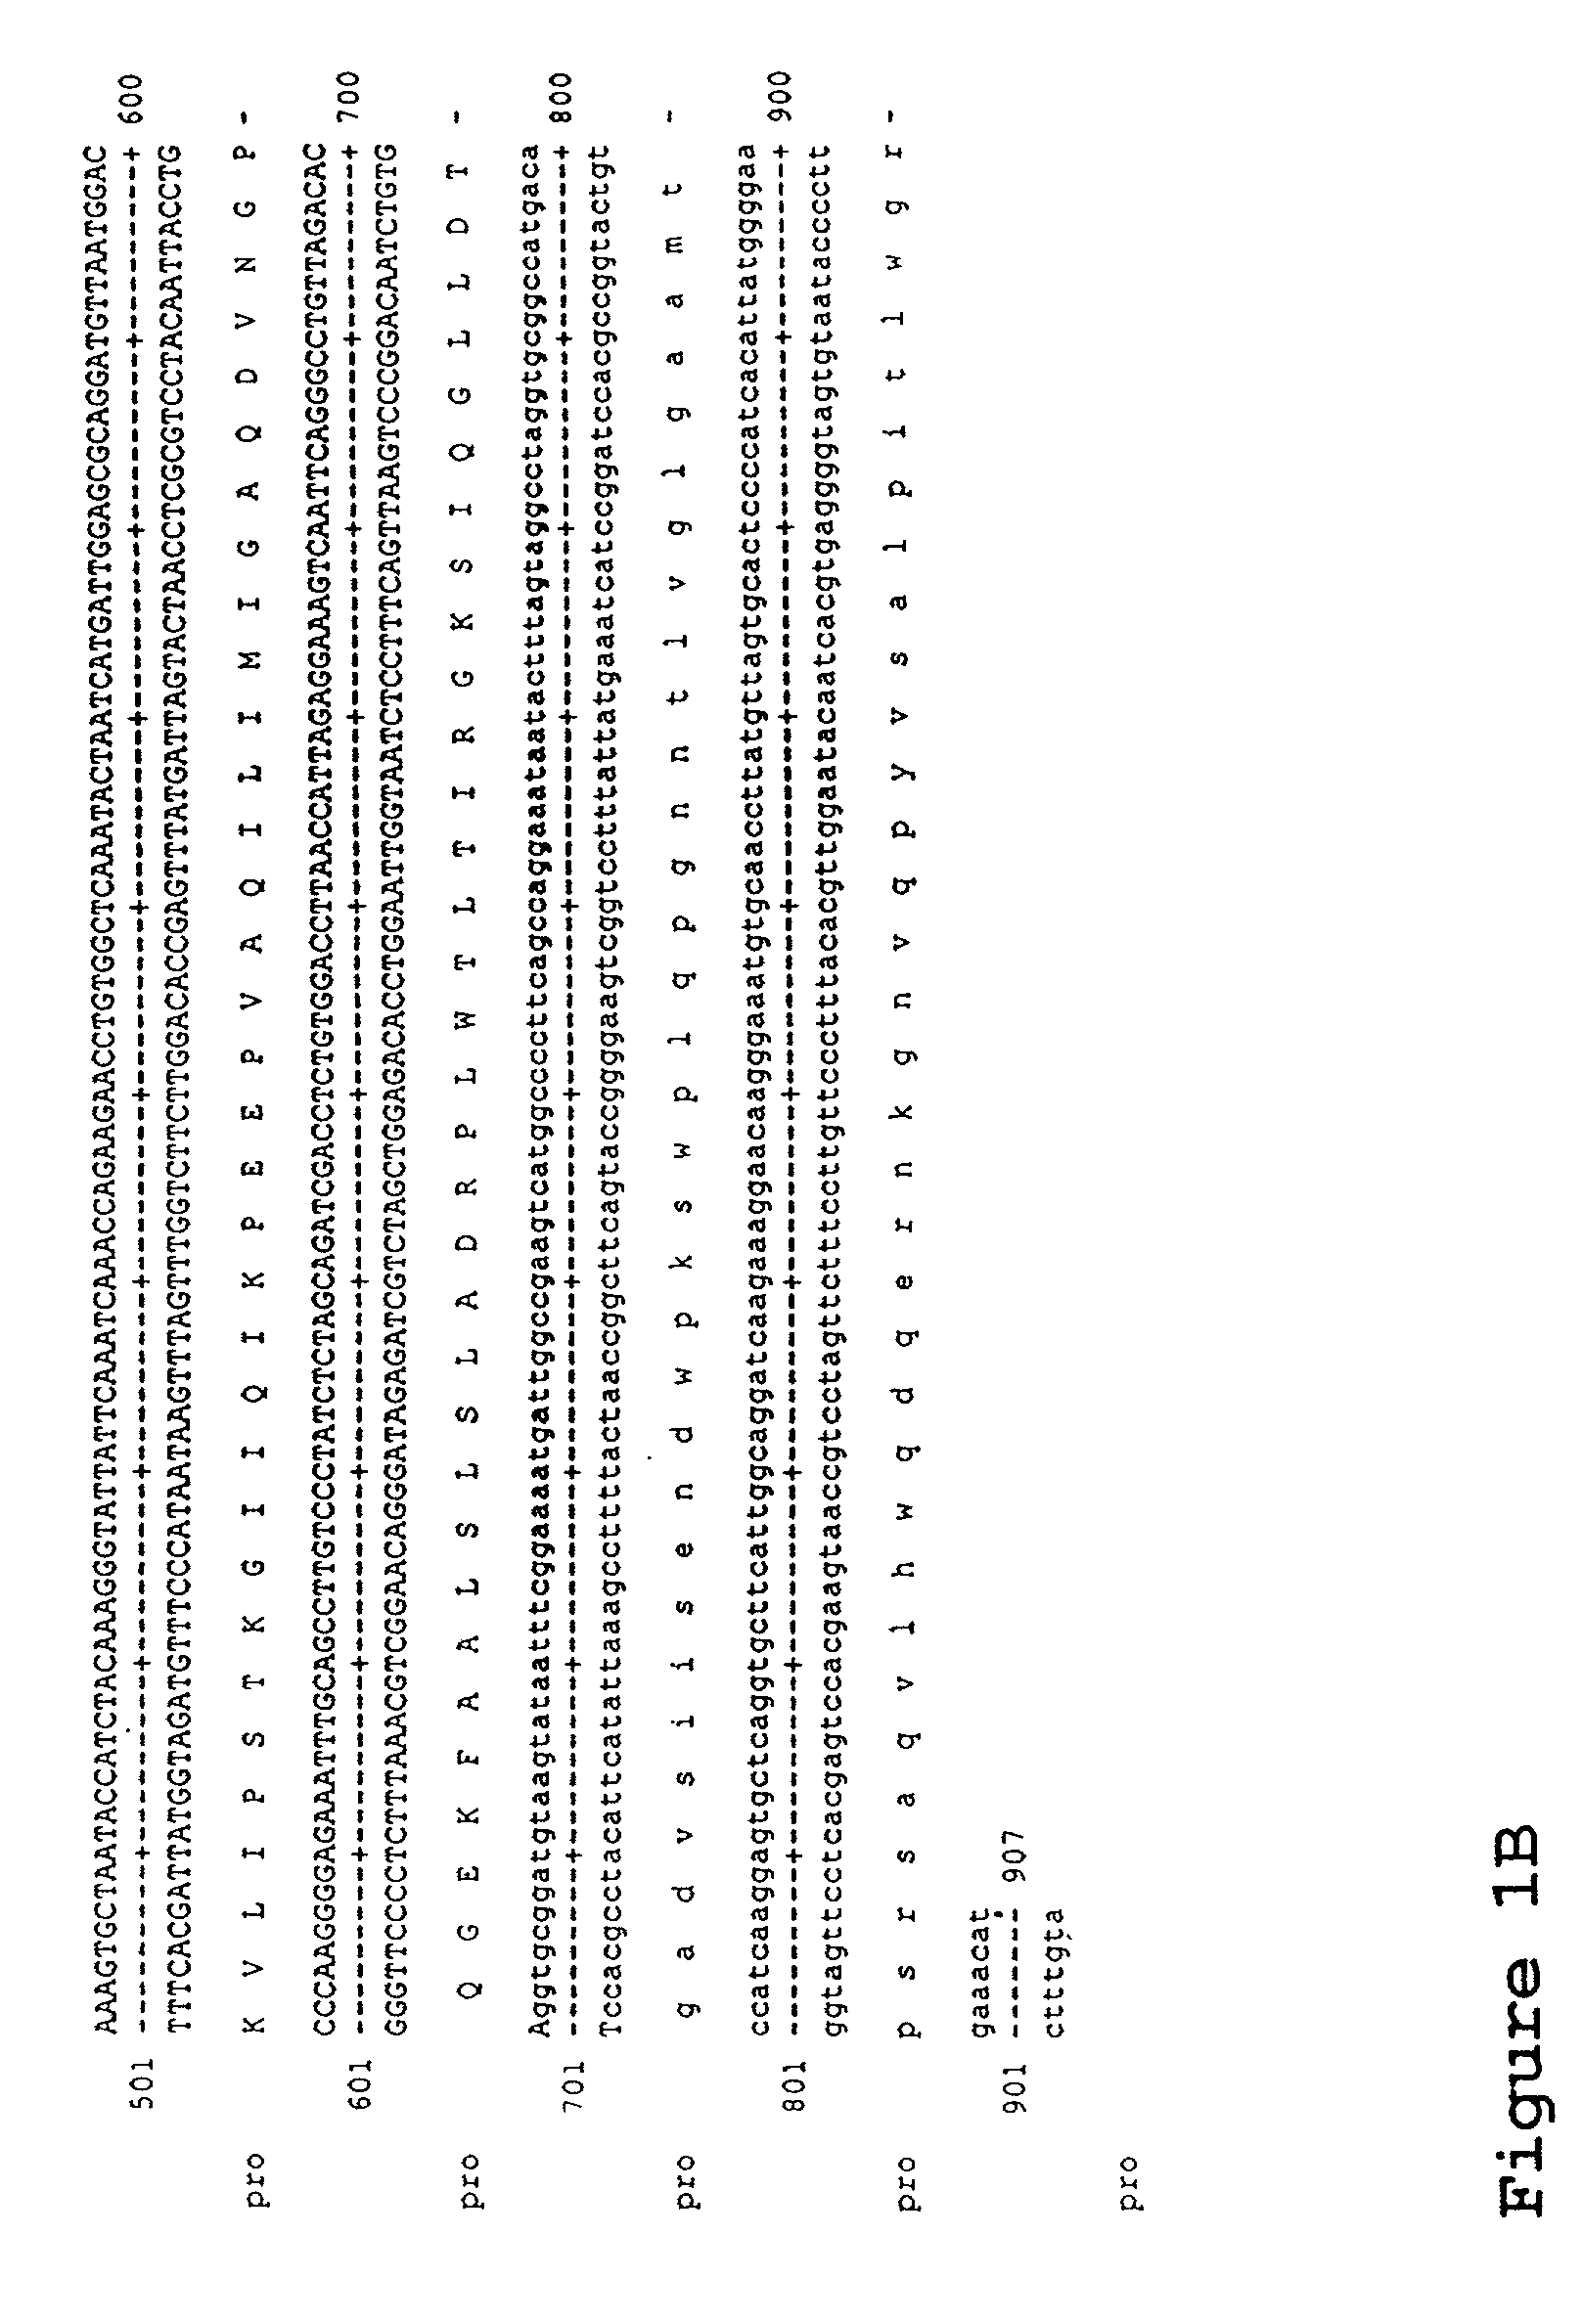 Material and methods relating to a novel retrovirus